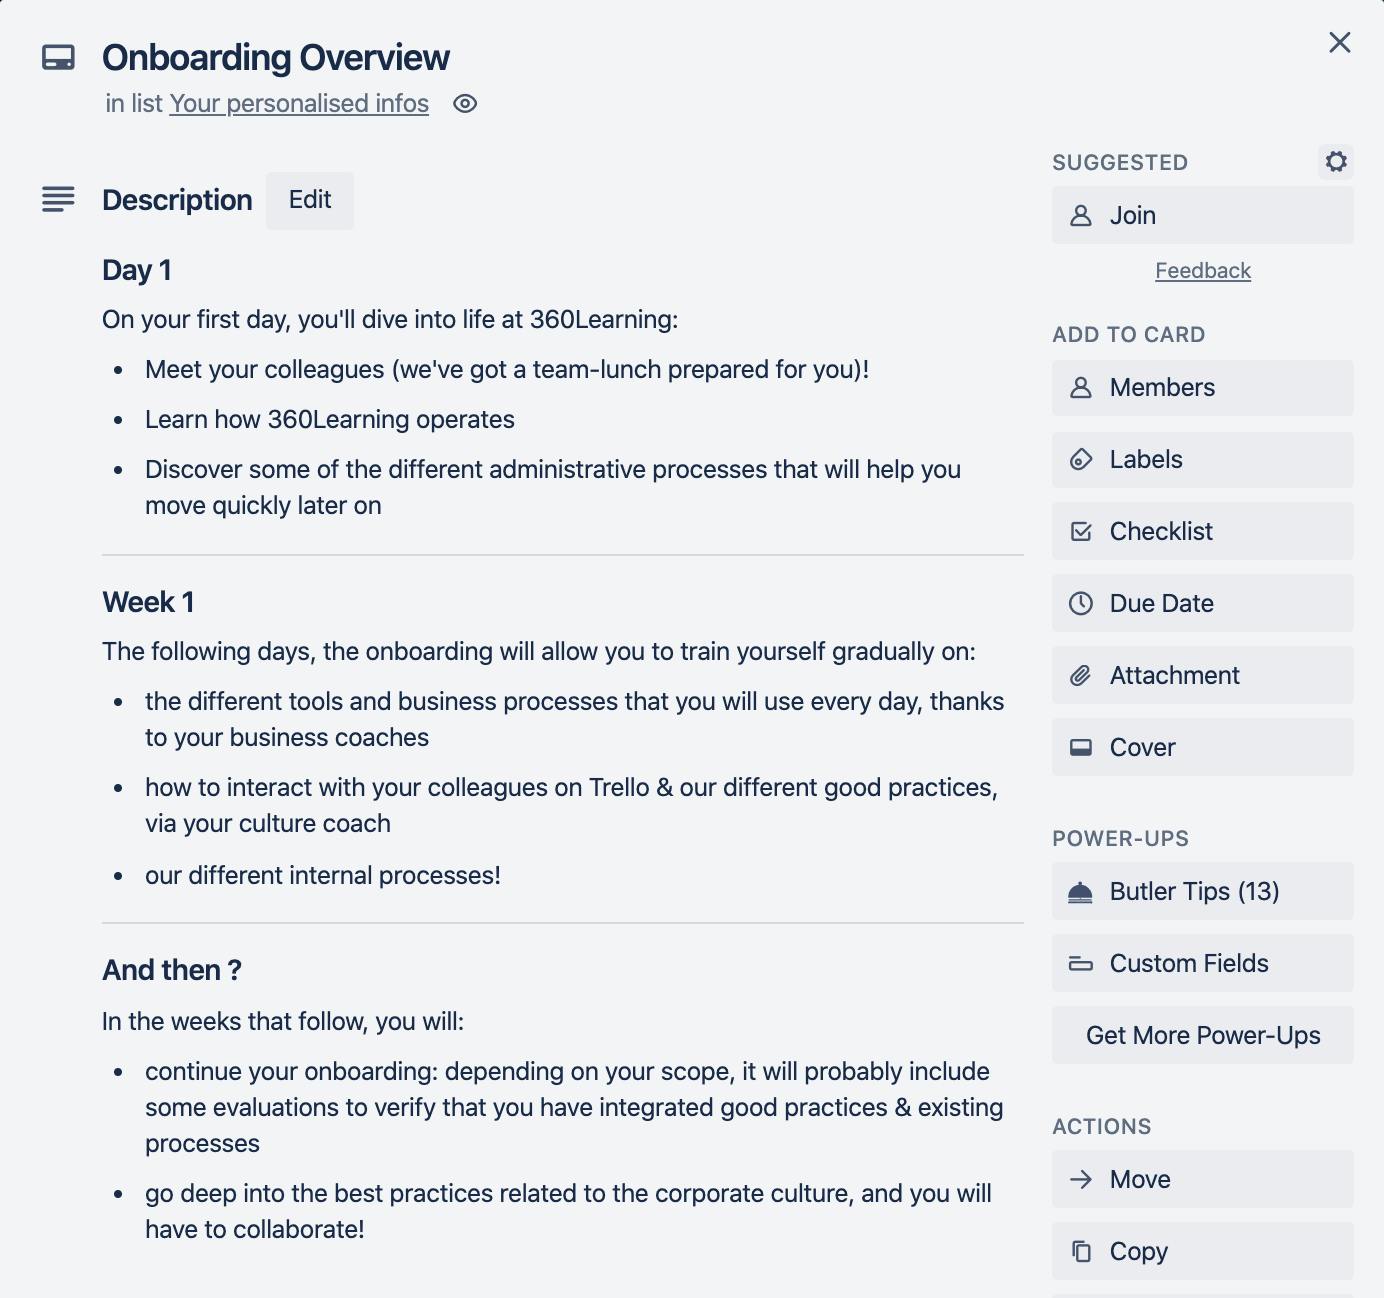 Onboarding overview Day 1 to Week 1